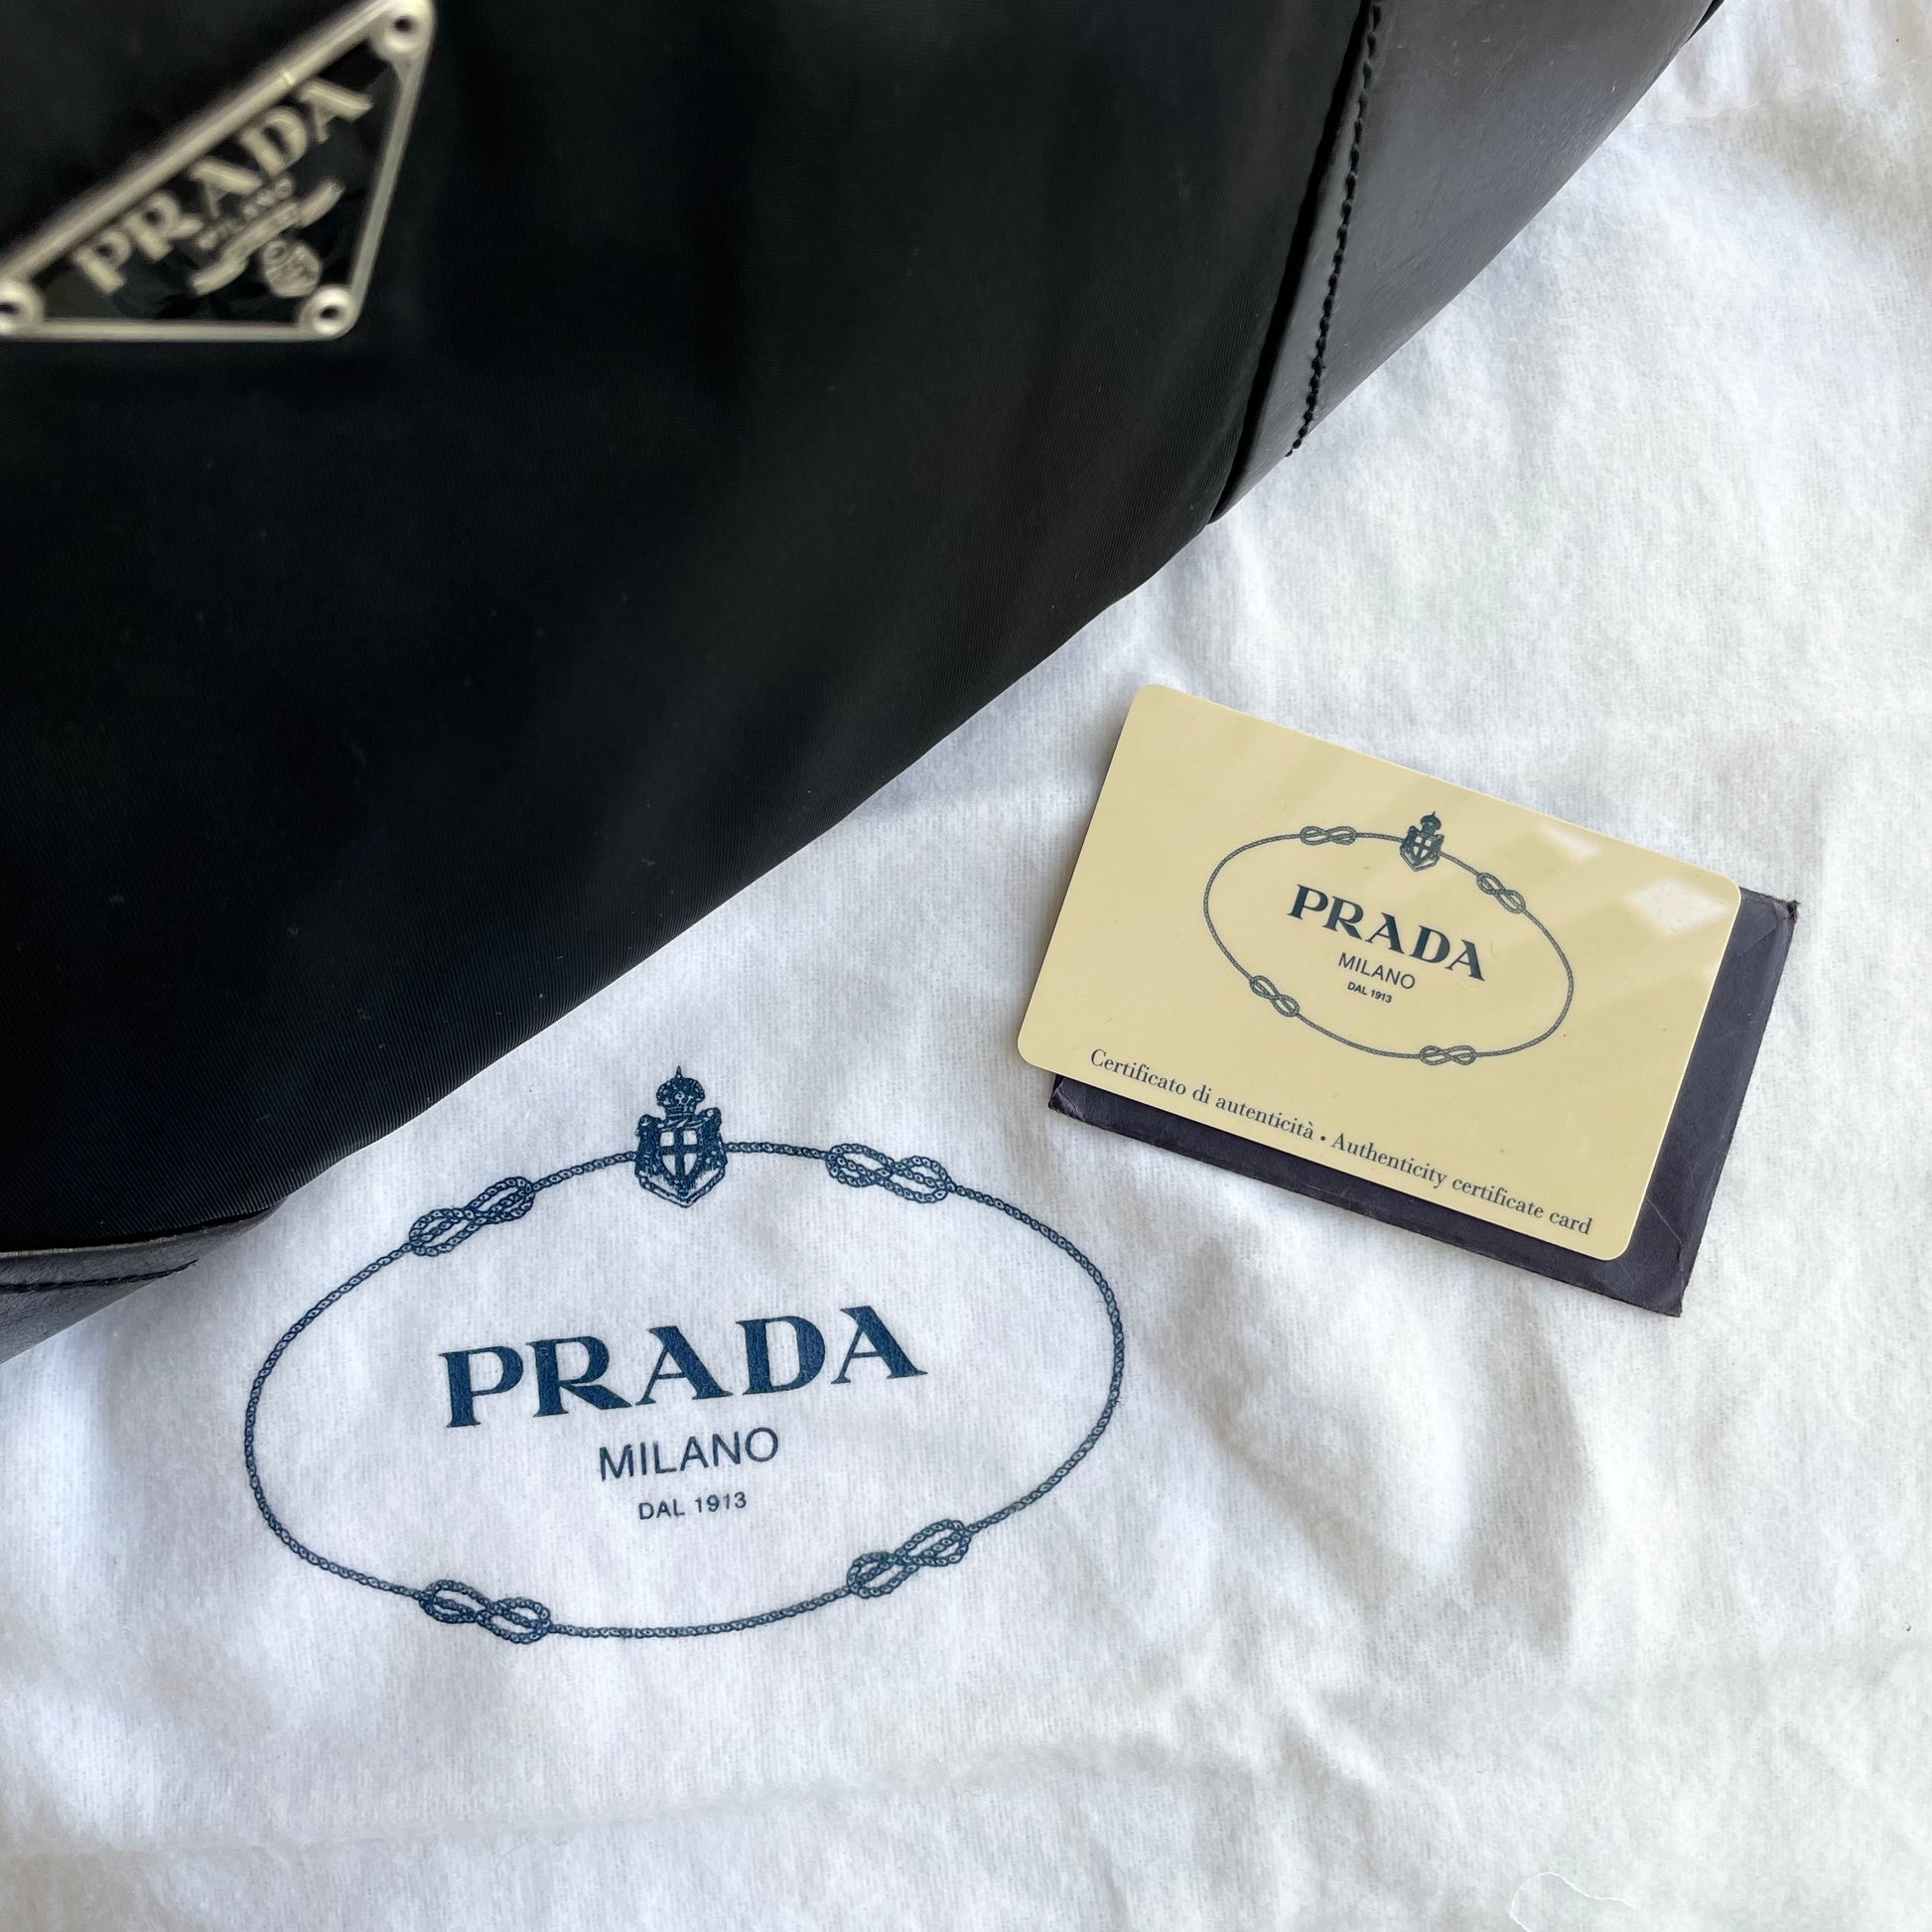 Prada Authenticity certificate card ONLY